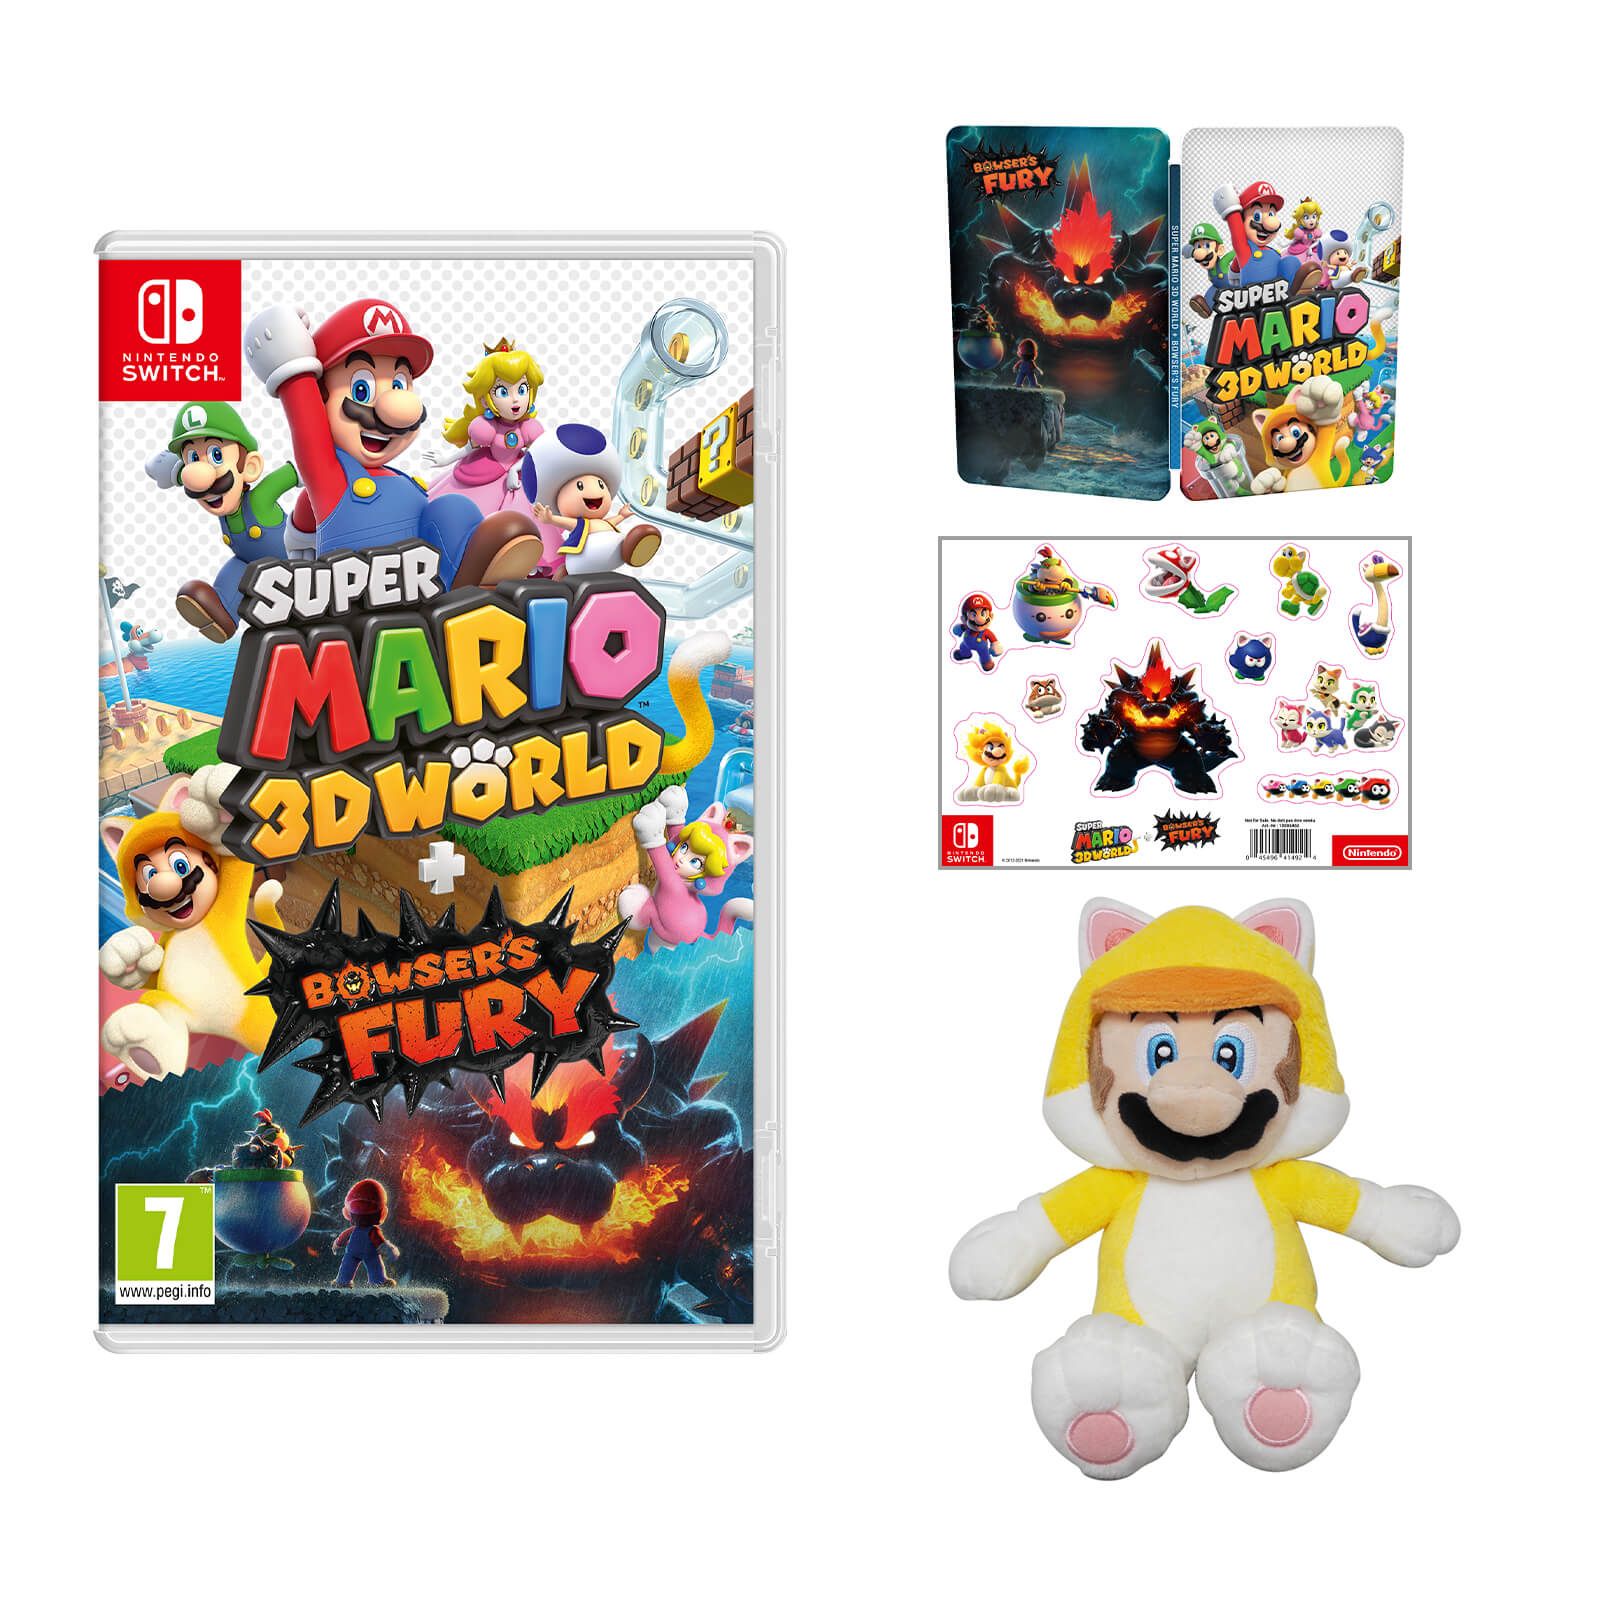 3d world switch release date